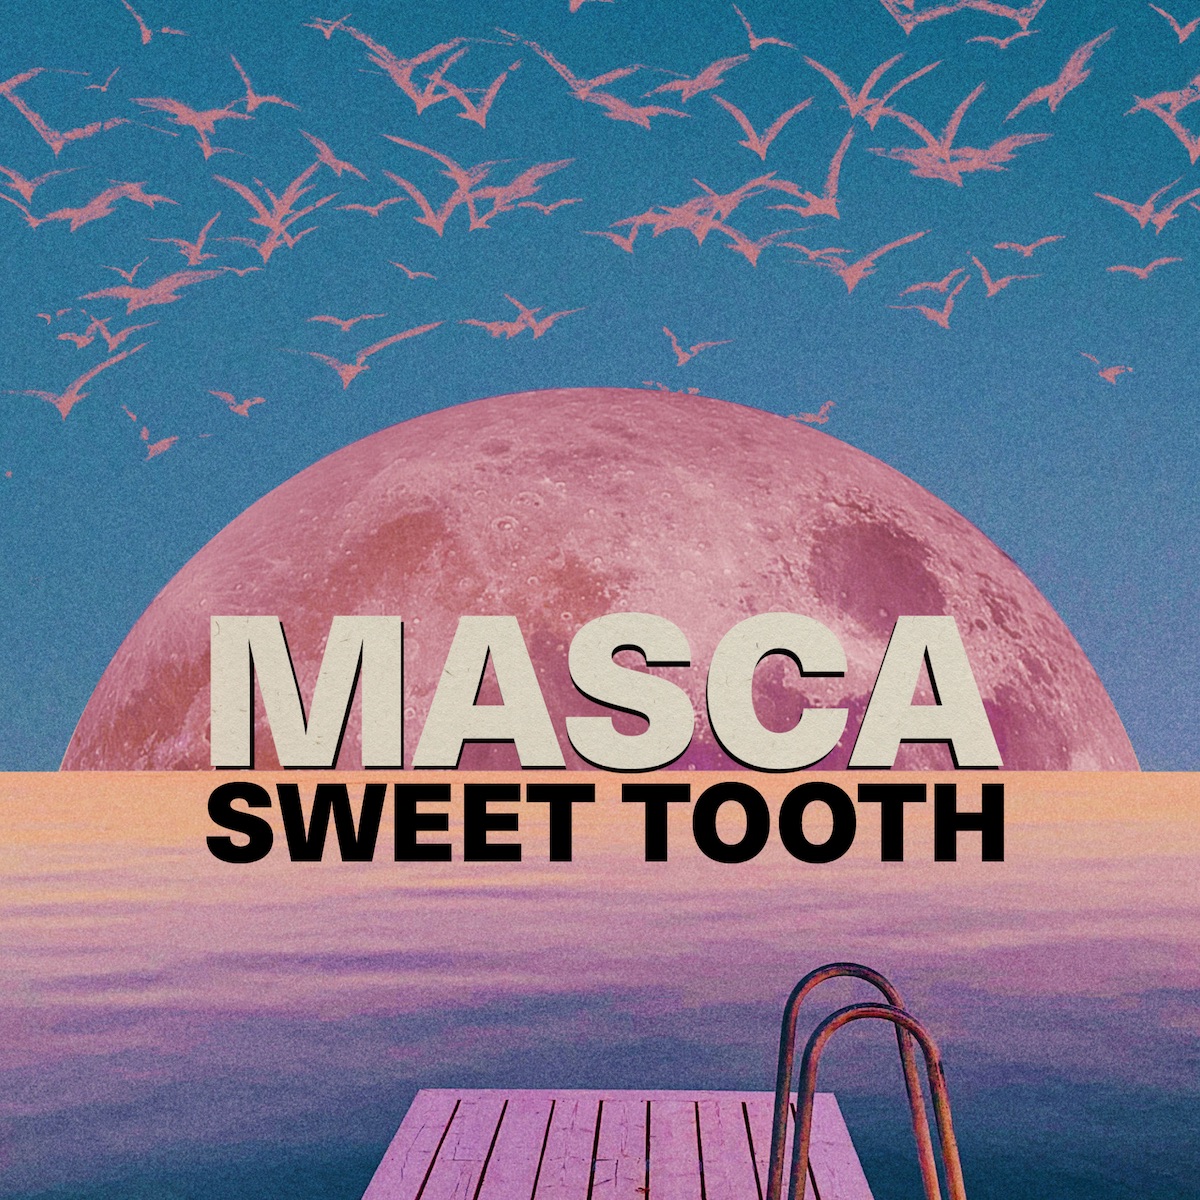 LISTEN: “Sweet Tooth” by Masca